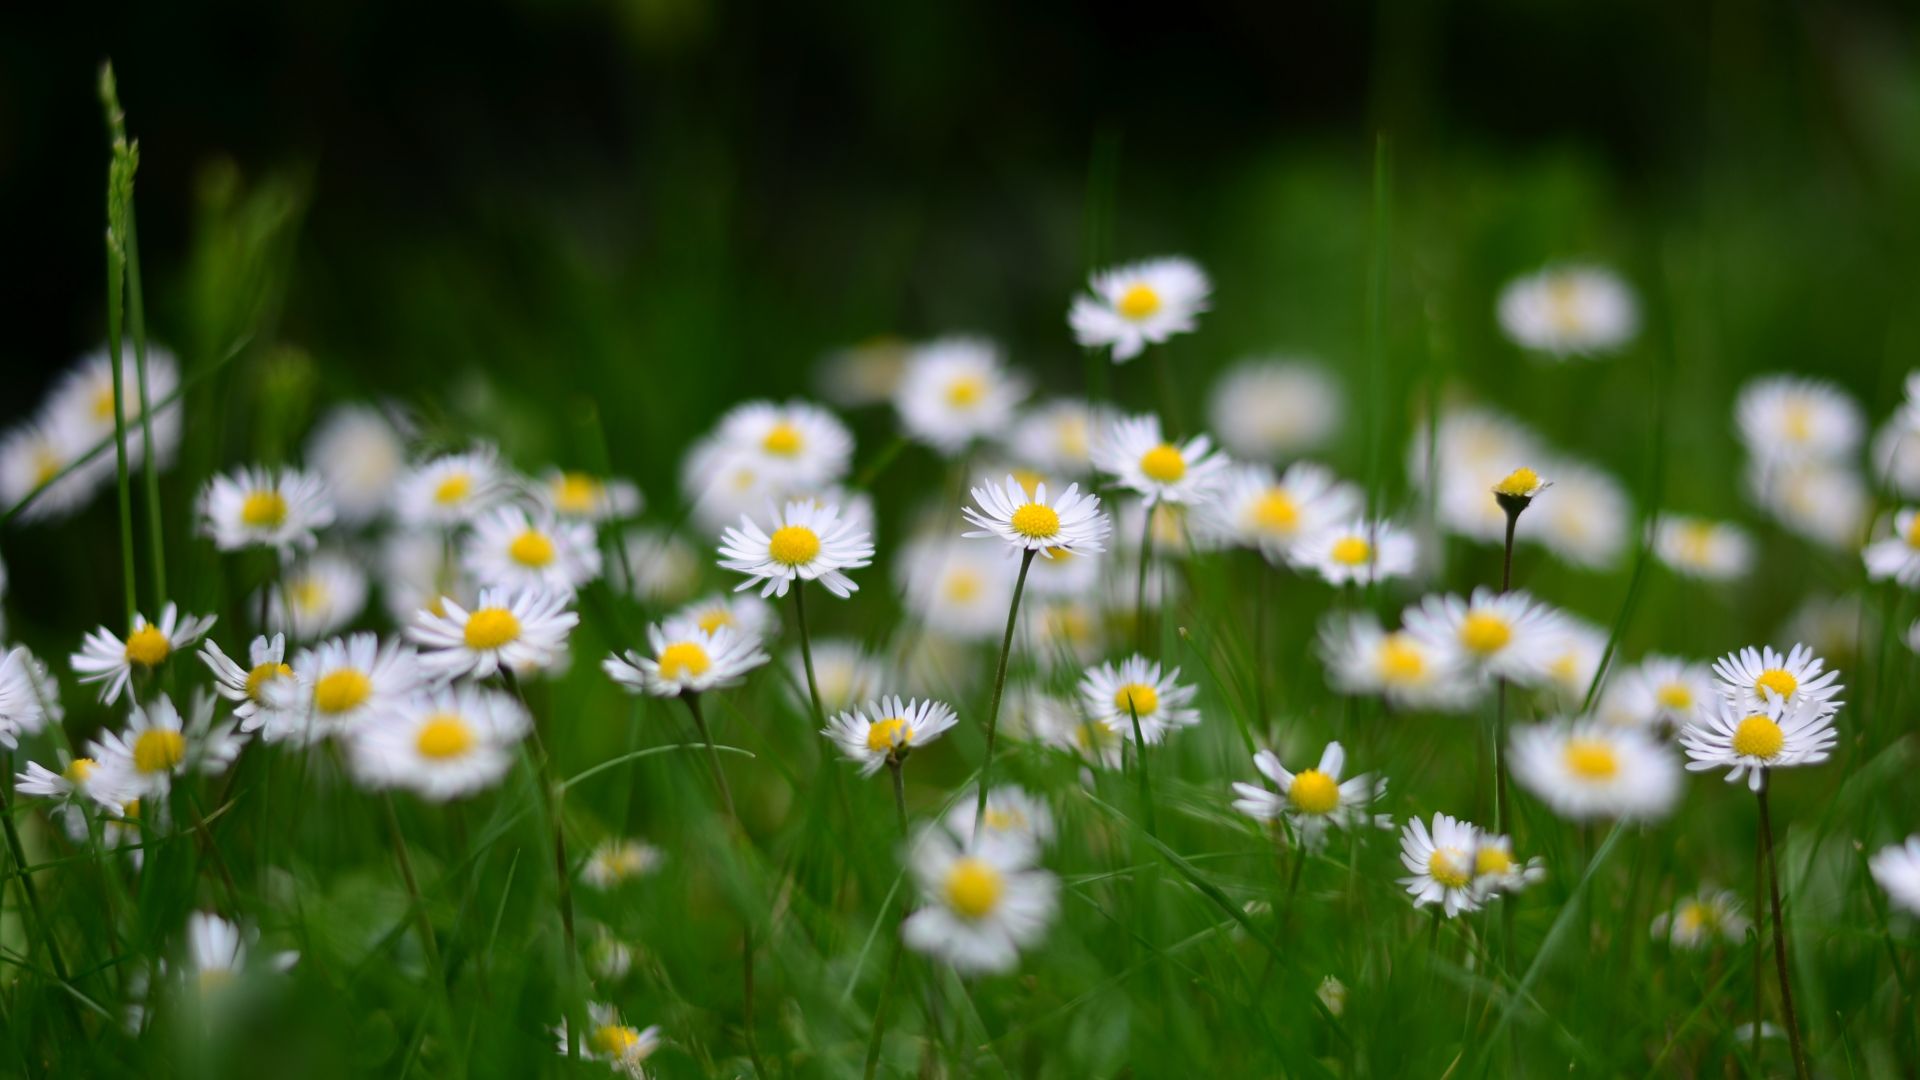 White And Yellow Daisy Desktop Wallpaper Template and Ideas for Design   Fotor